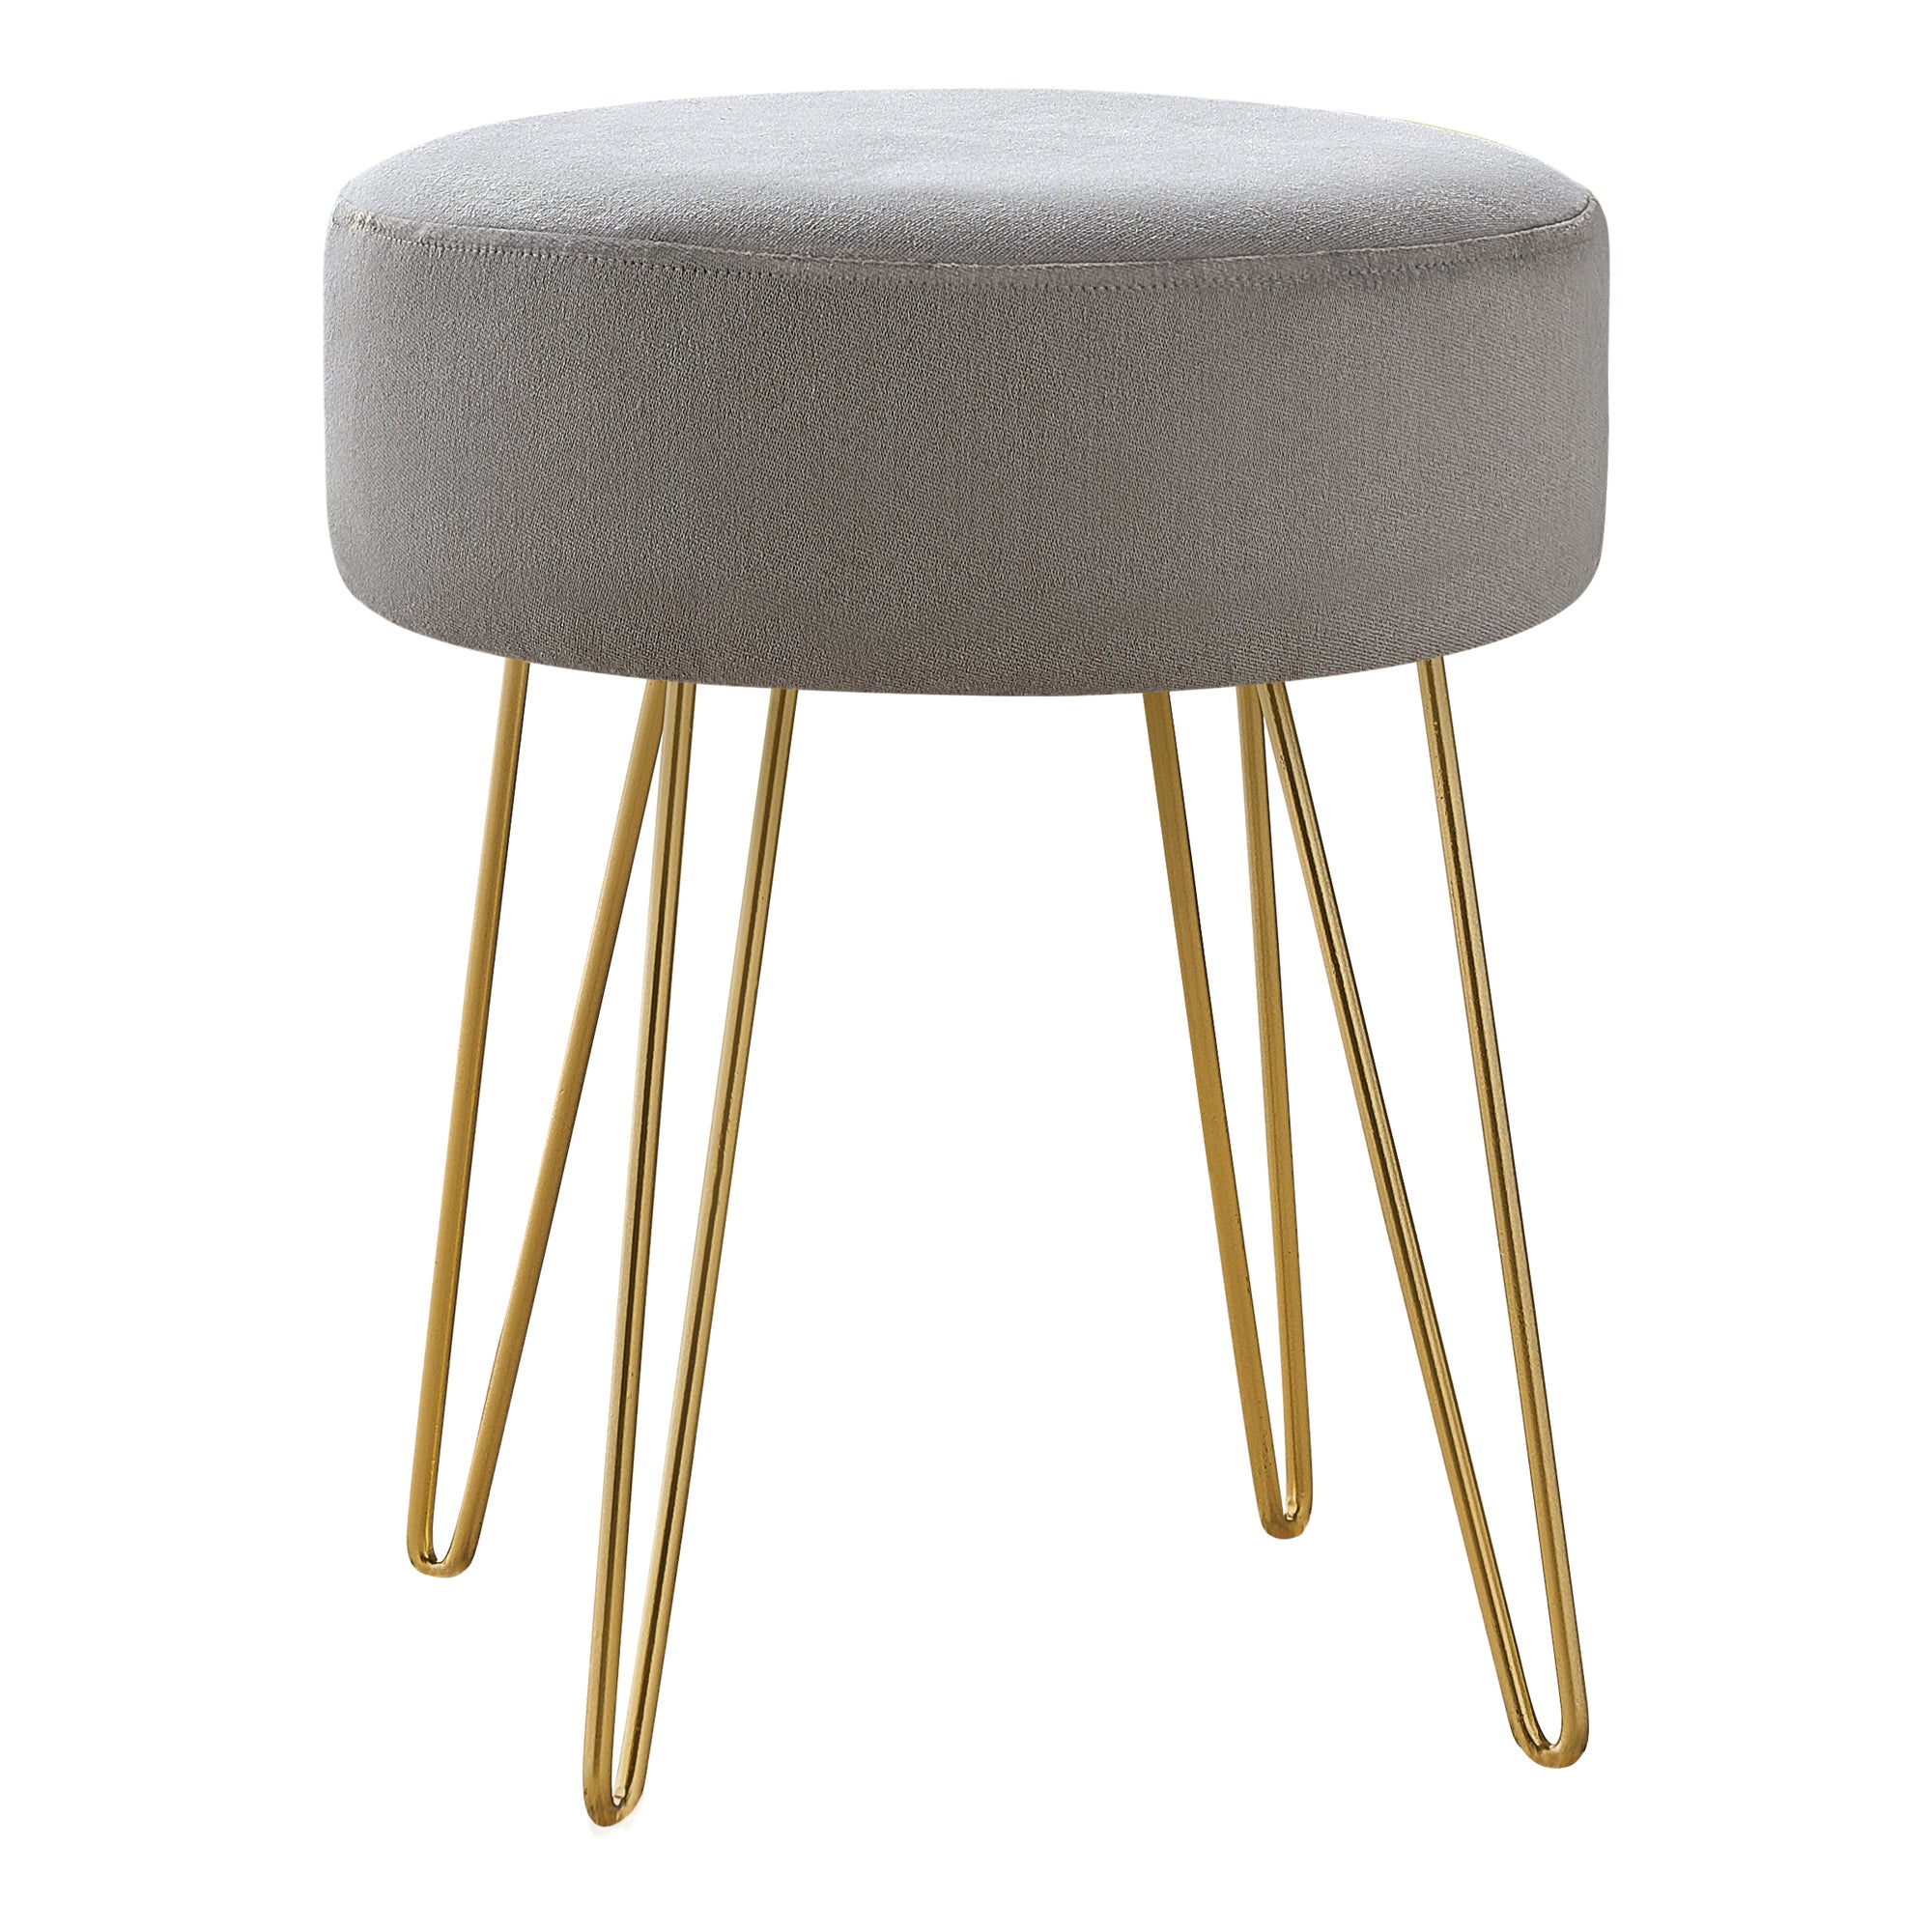 MN-219003    Ottoman, Pouf, Footrest, Foot Stool, 14" Round, Fabric, Metal Legs, Grey, Gold, Contemporary, Modern